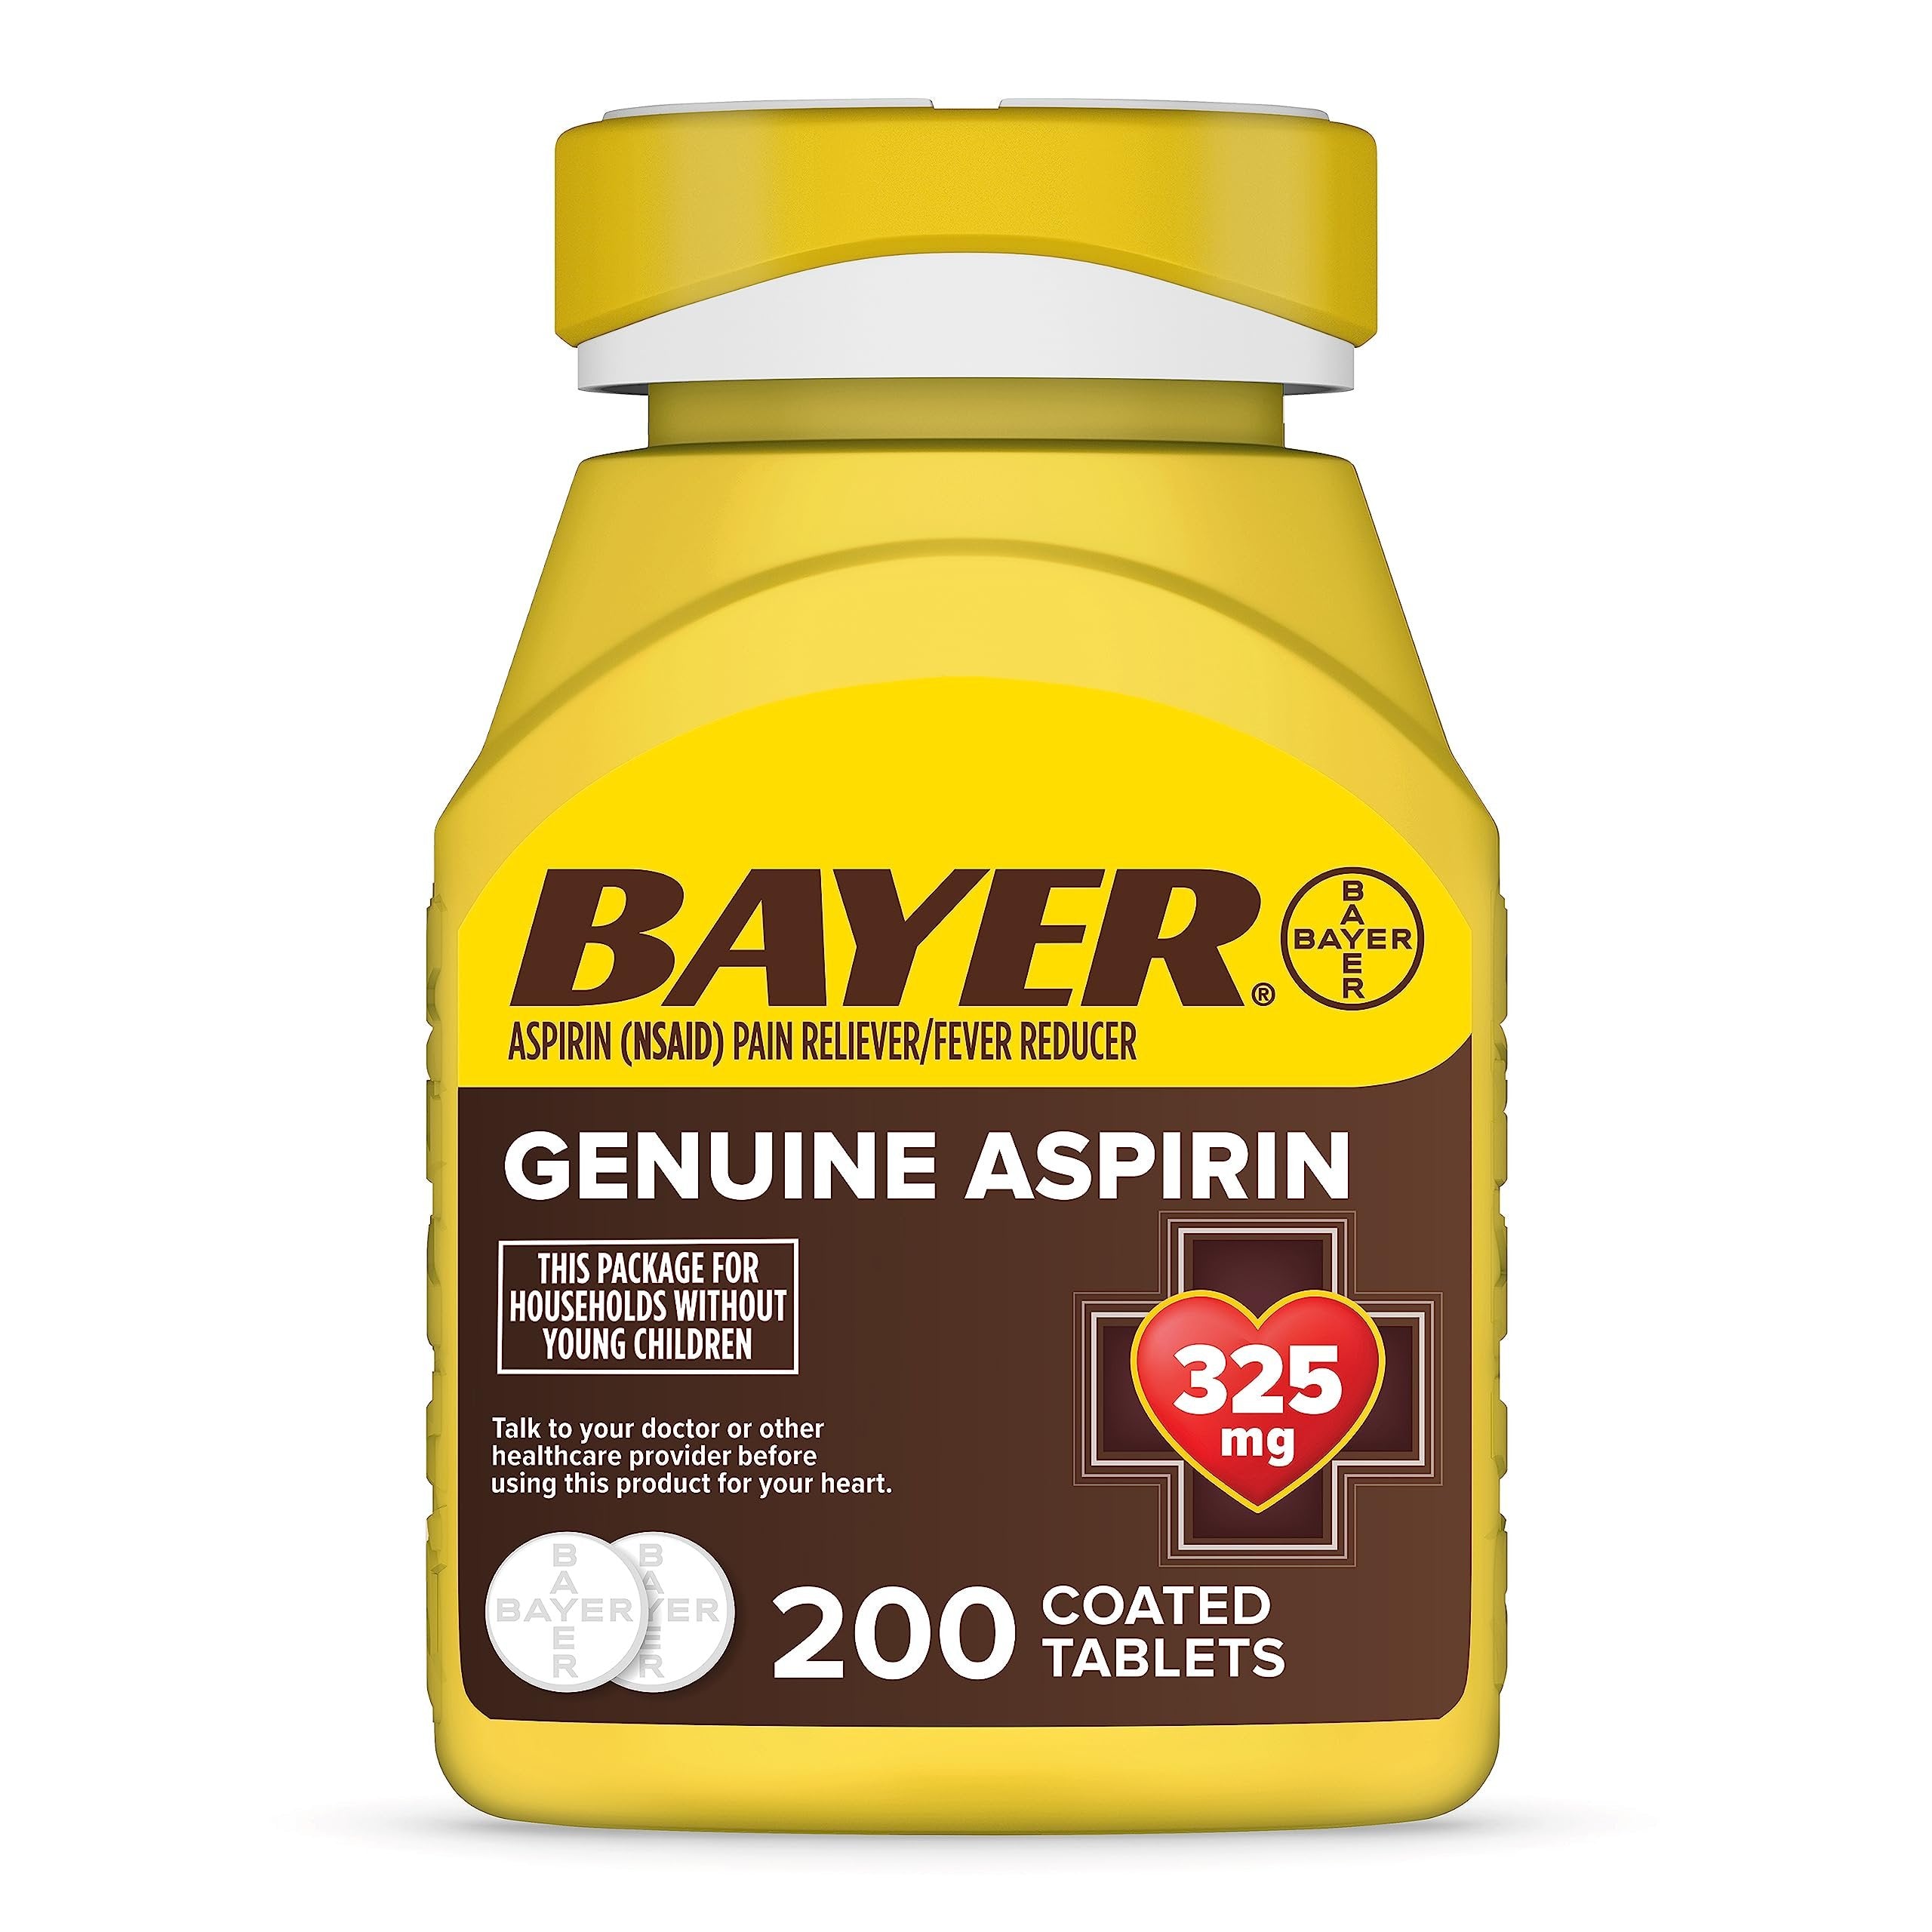 Bayer Genuine Aspirin 325mg Coated Tablets, Pain Reliever and Fever Reducer, 200 Count